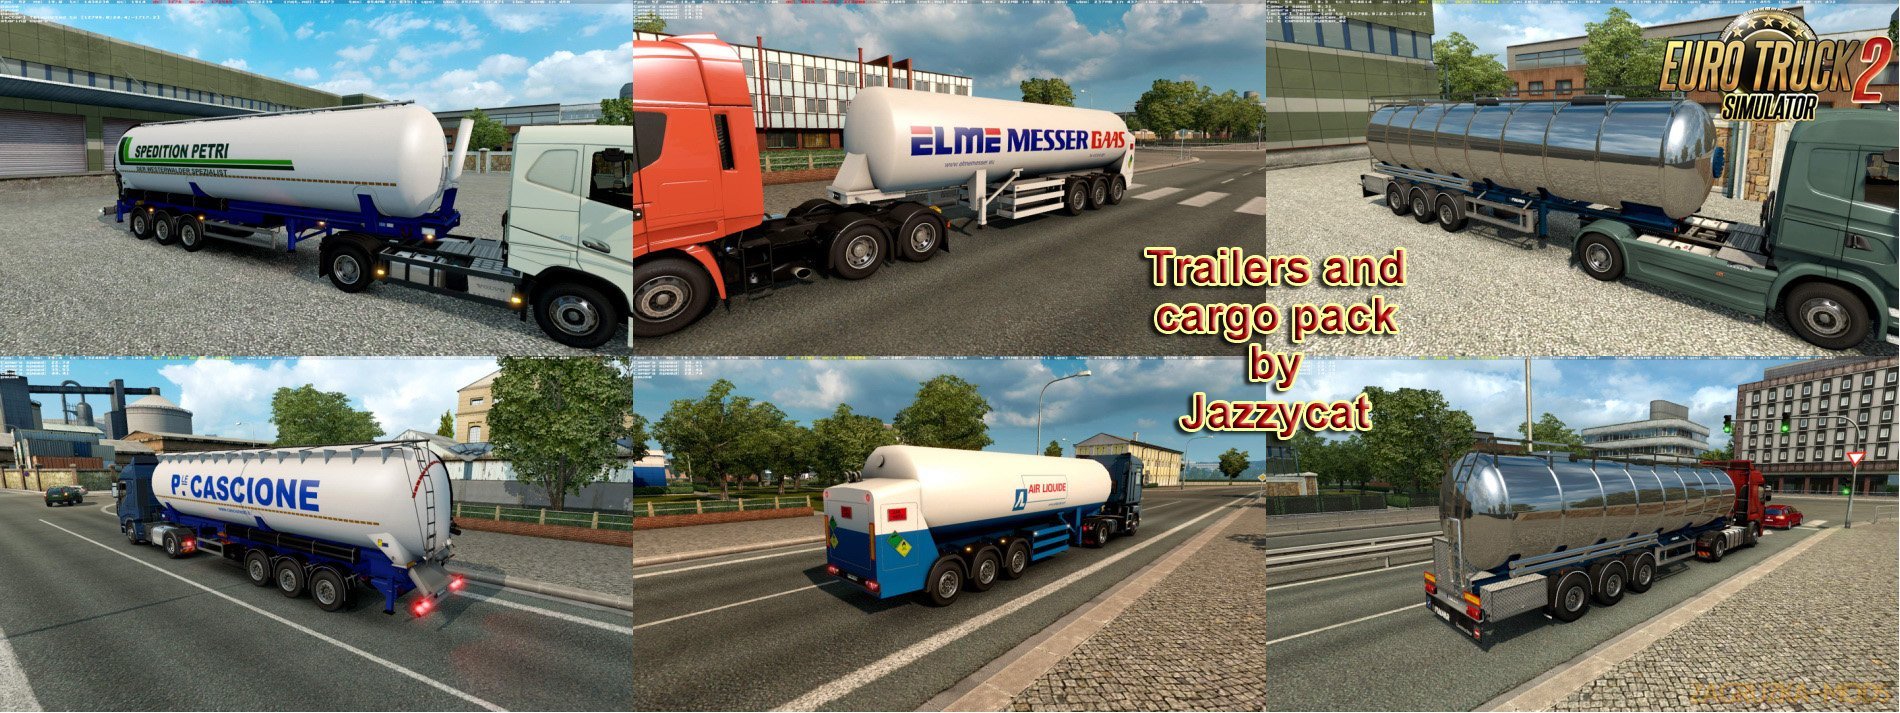 Trailers and Cargo Pack v5.1 by Jazzycat (1.27.x) for ETS 2